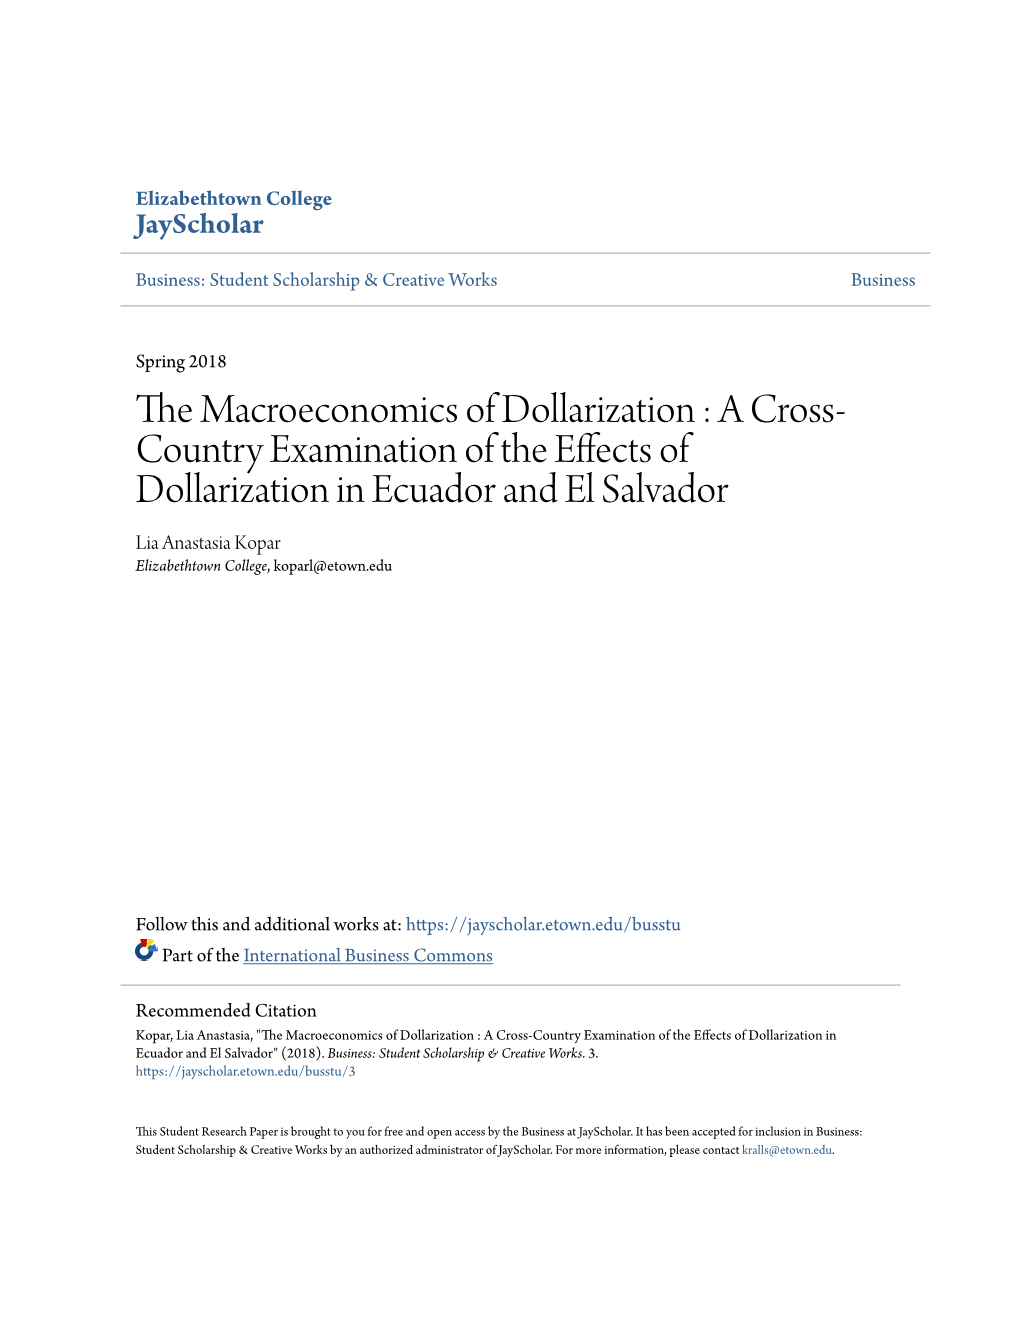 The Macroeconomics of Dollarization : a Cross-Country Examination Of